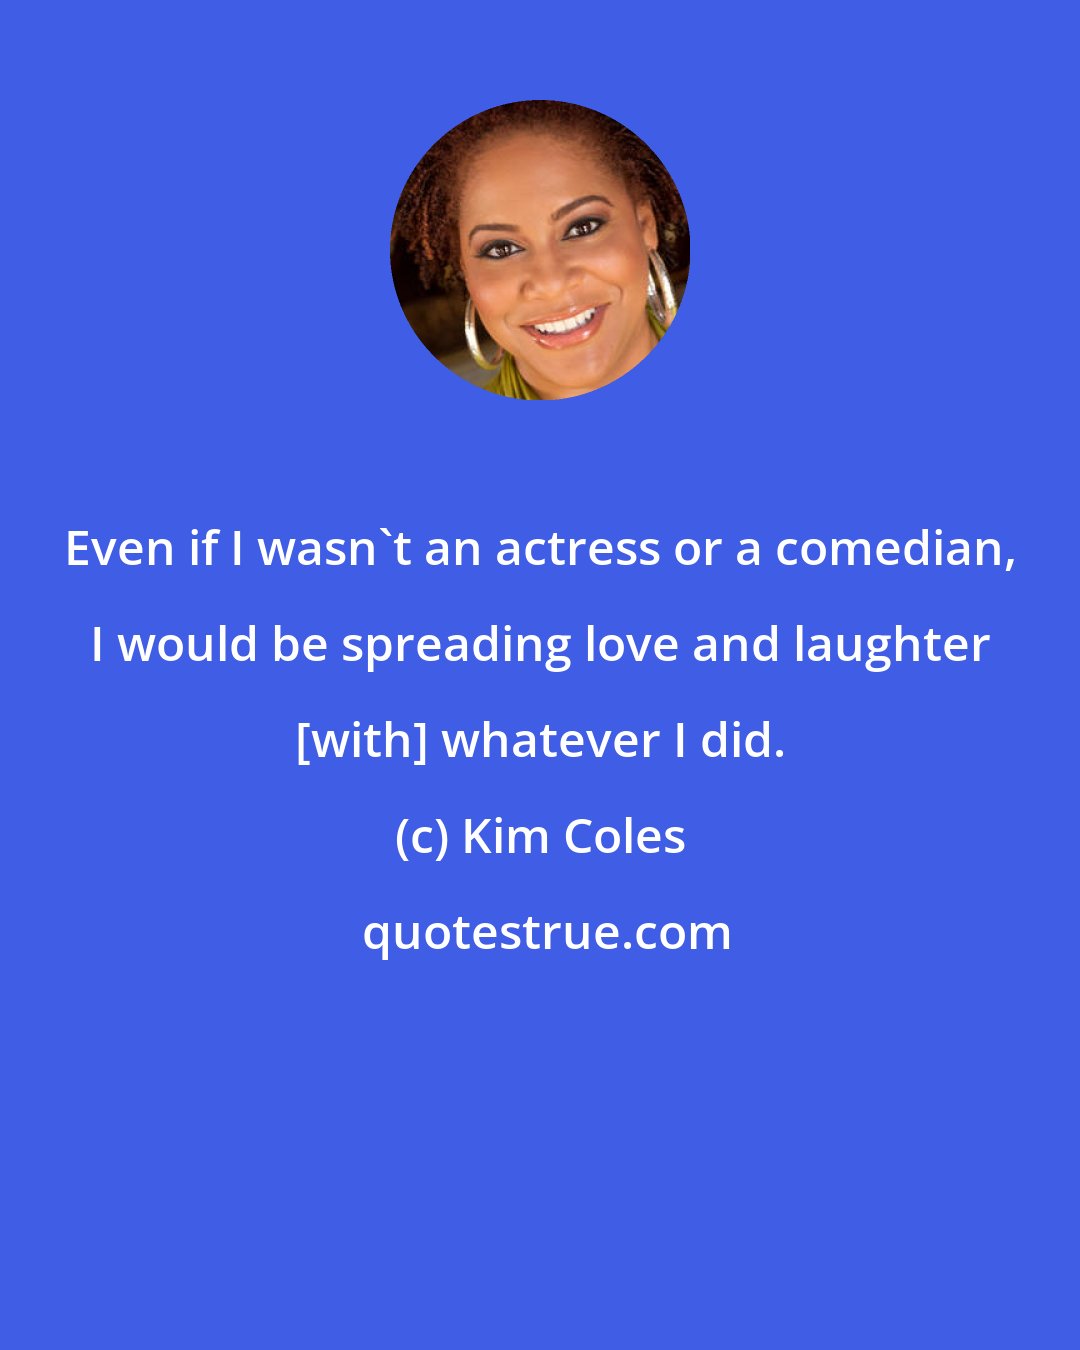 Kim Coles: Even if I wasn't an actress or a comedian, I would be spreading love and laughter [with] whatever I did.